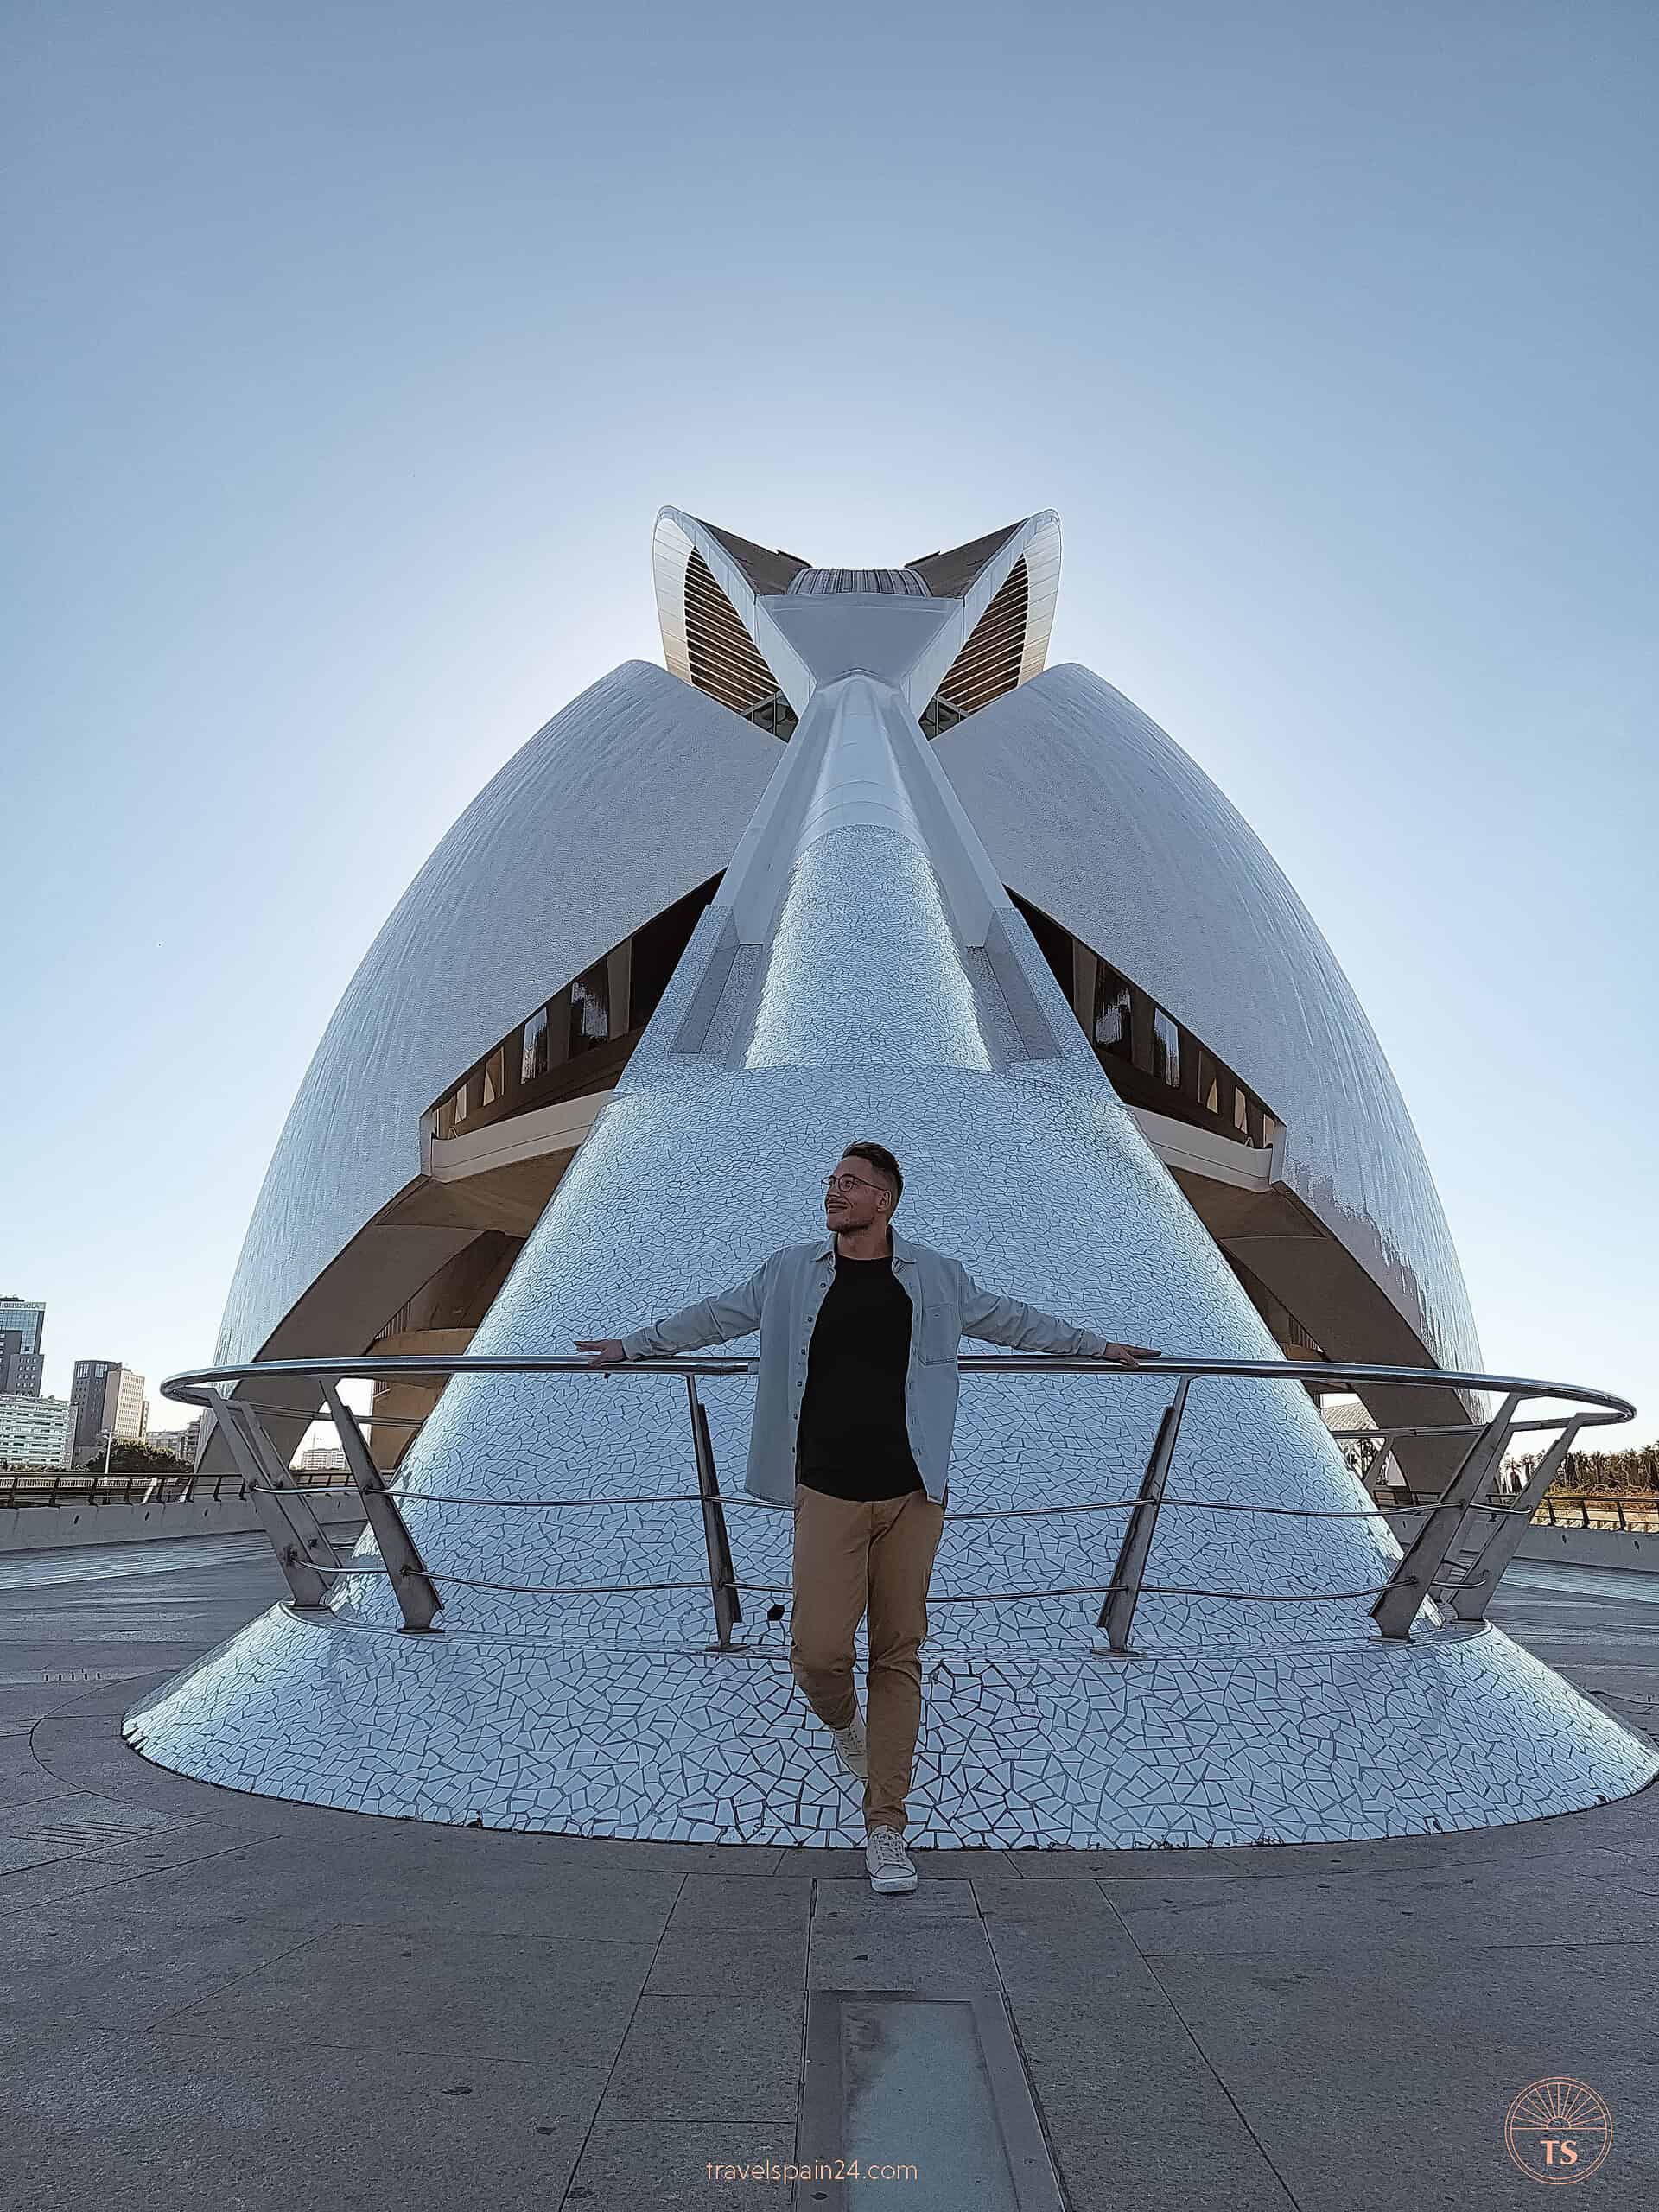 Timon van Basten posing in front of Palau de les Arts in Valencia's City of Arts and Sciences on a sunny day with clear blue skies, capturing the joyful essence of visiting this iconic site.